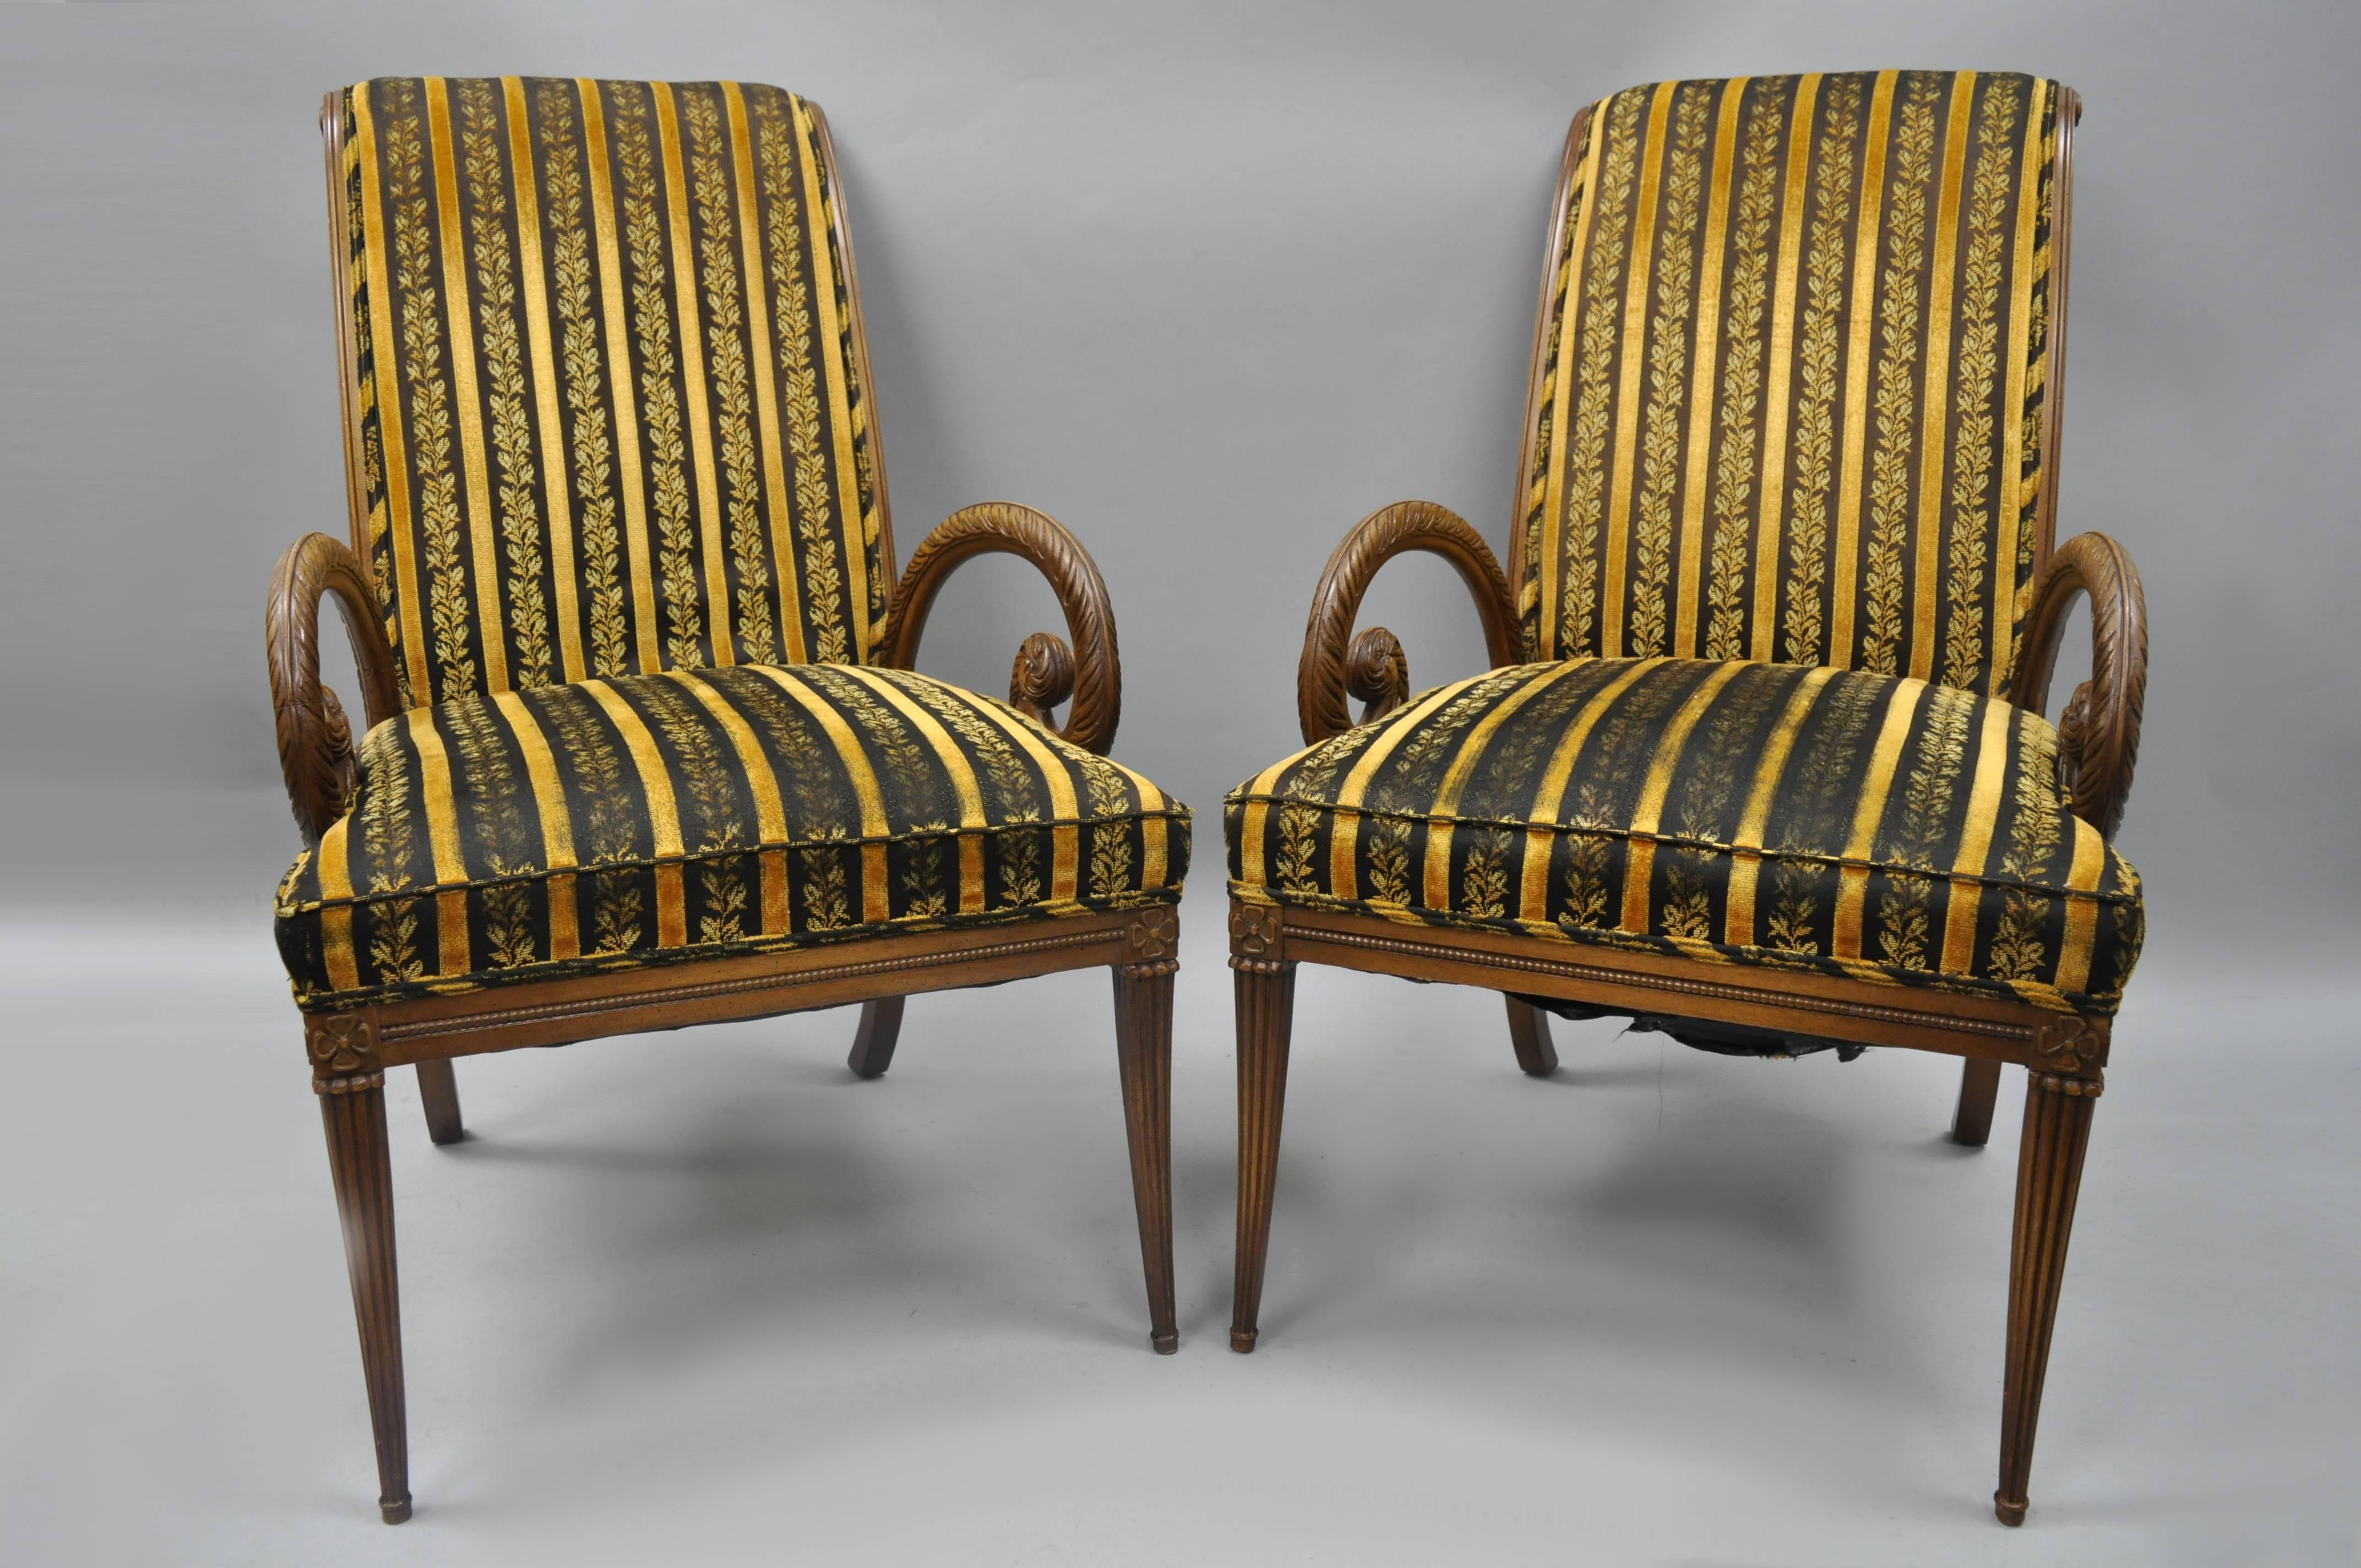 Pair of vintage Hollywood Regency mahogany armchairs with plume feather carved arms attributed to Grosfeld House. Item features wood construction, nicely carved details, tapered legs, sleek sculptural form, circa 1950s. Measurements: 40